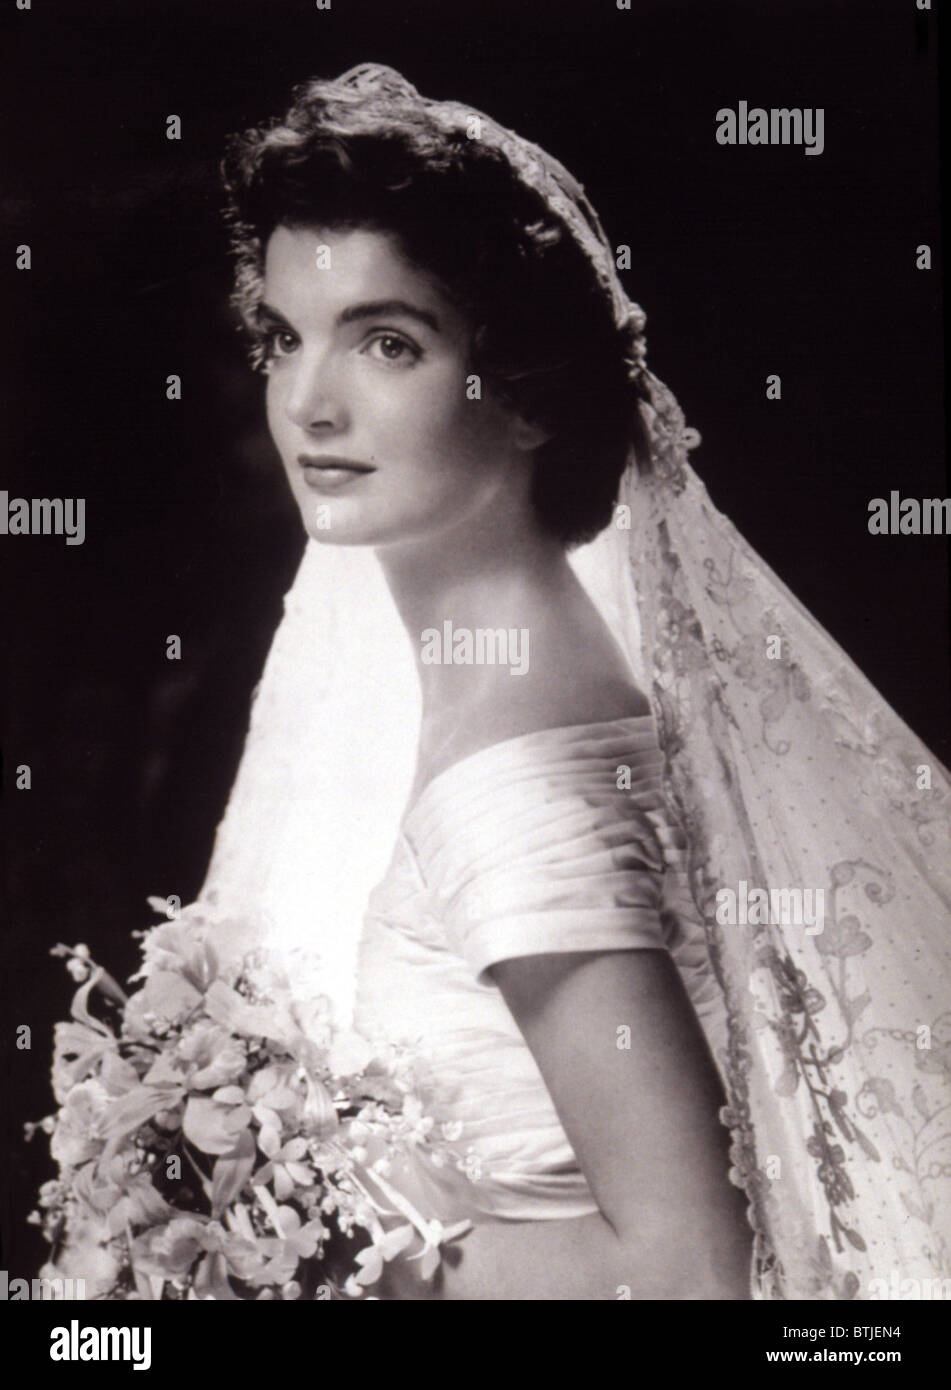 Jacqueline Bouvier Kennedy's wedding picture, 1953. Stock Photo